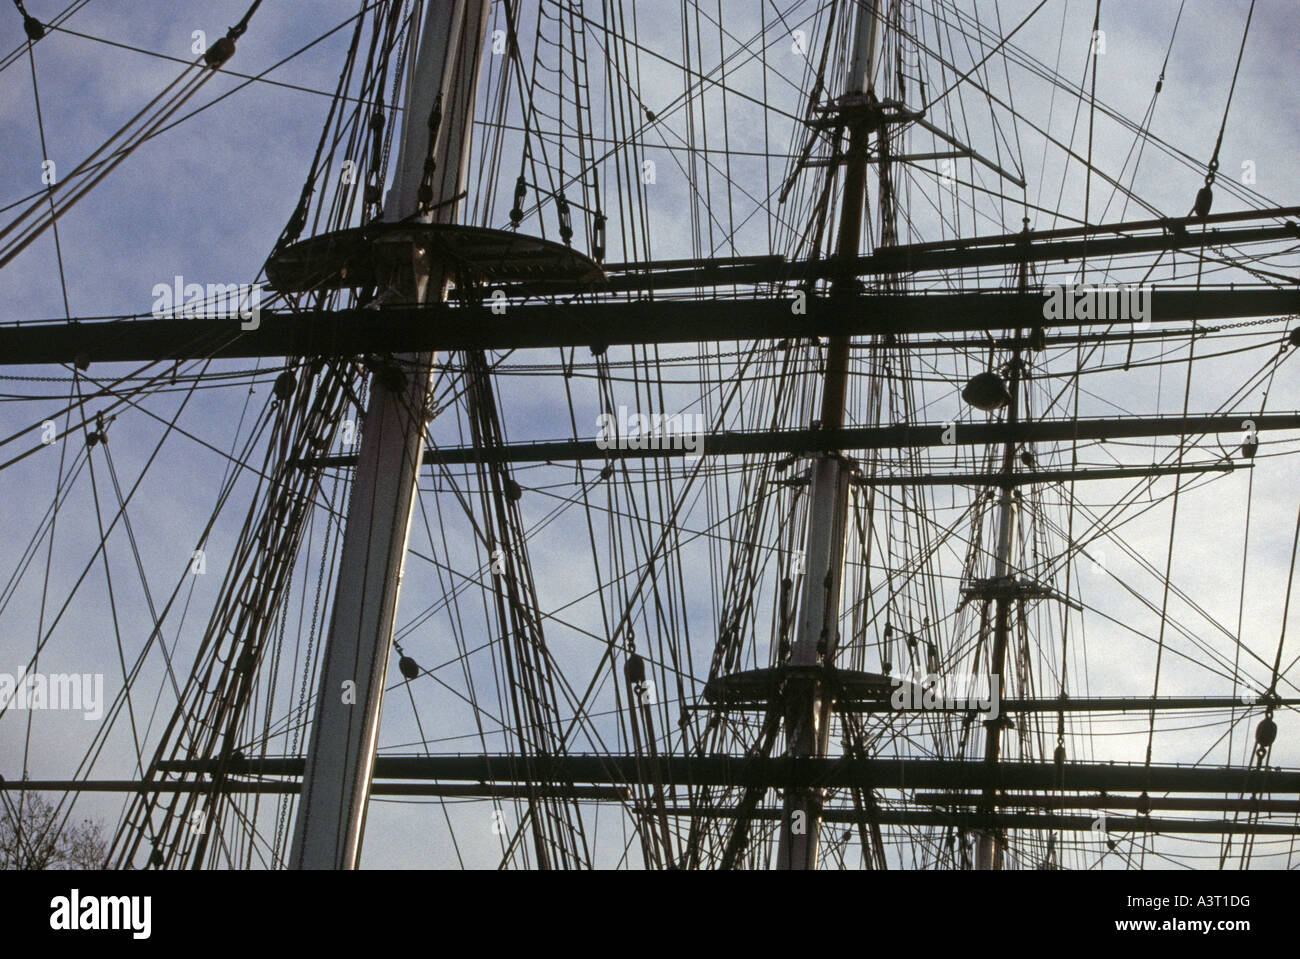 Close view of the Cutty Sark's masts and rigging in partial silhouette, Greenwich, SE10, London, UK Stock Photo